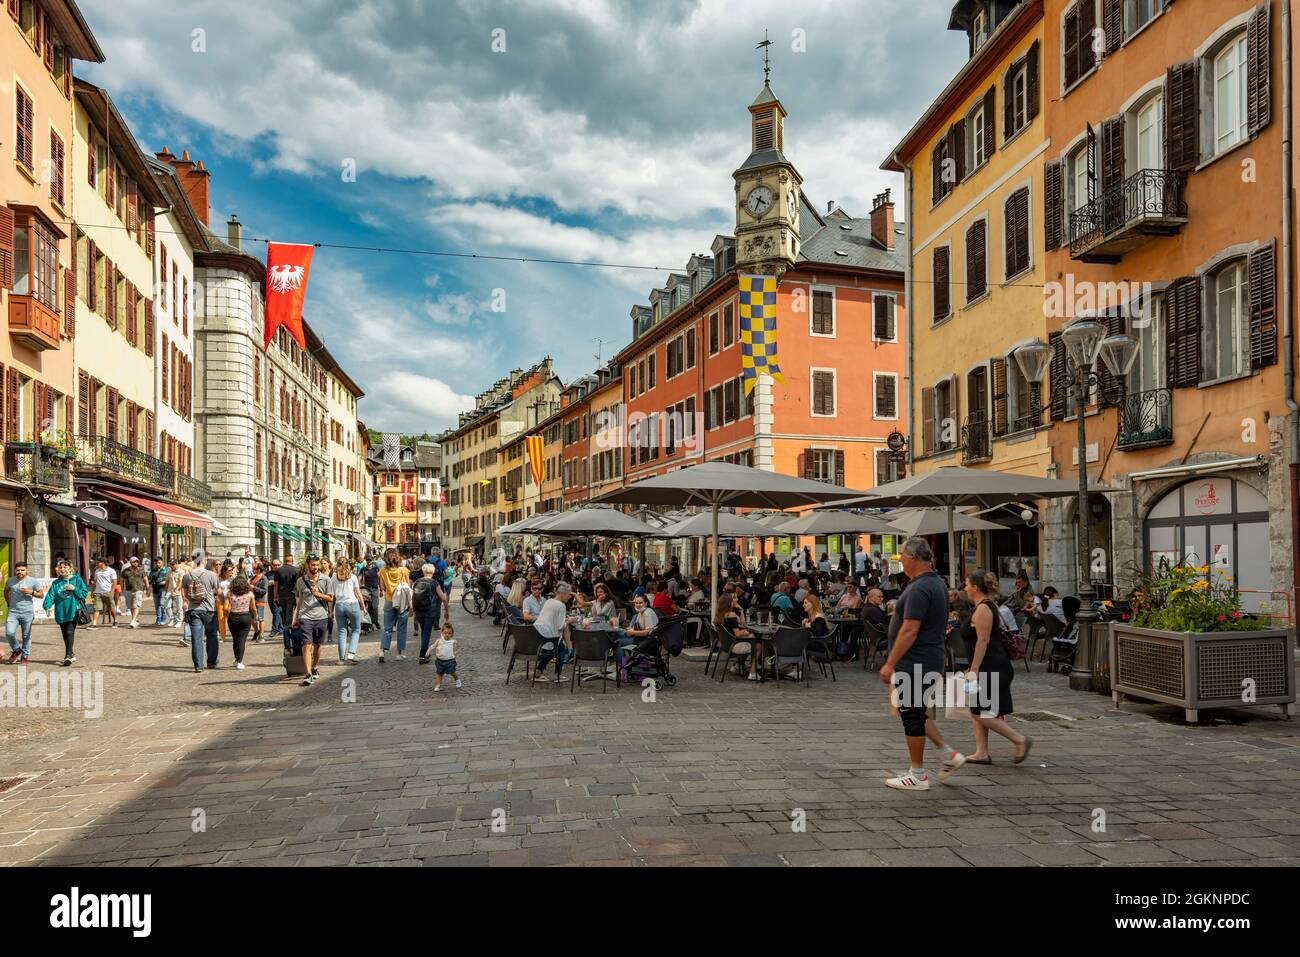 Tourists on the Place Saint-Leger in Chambery on a summer day. Chambery,  Auvergne-Rhône-Alpes region, Savoie department, France, Europe Stock Photo  - Alamy